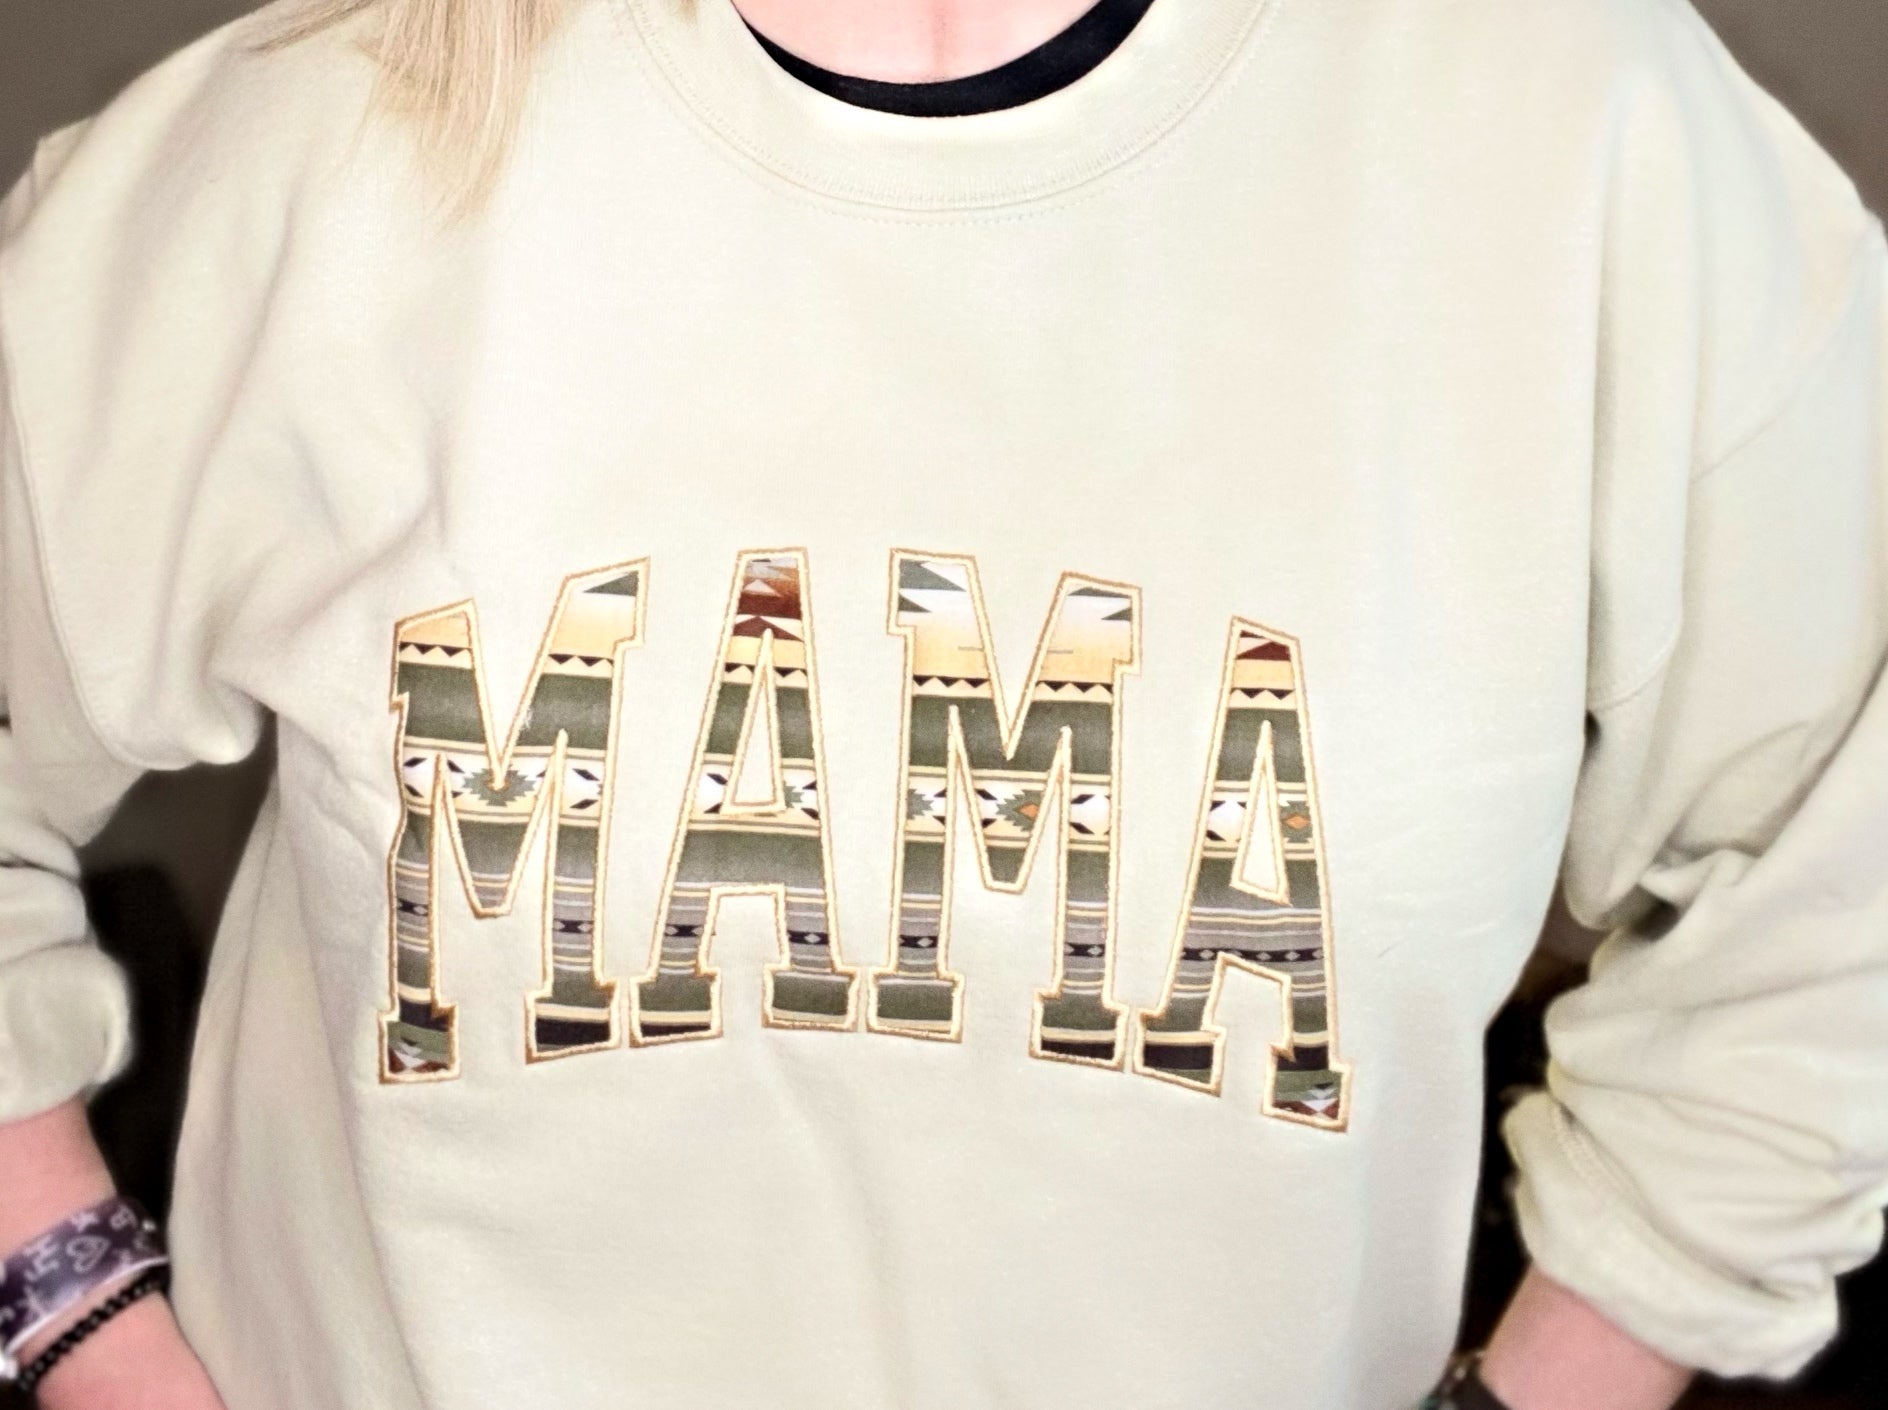 Mama Embroidered Sweatshirt - Forever Western Boutique